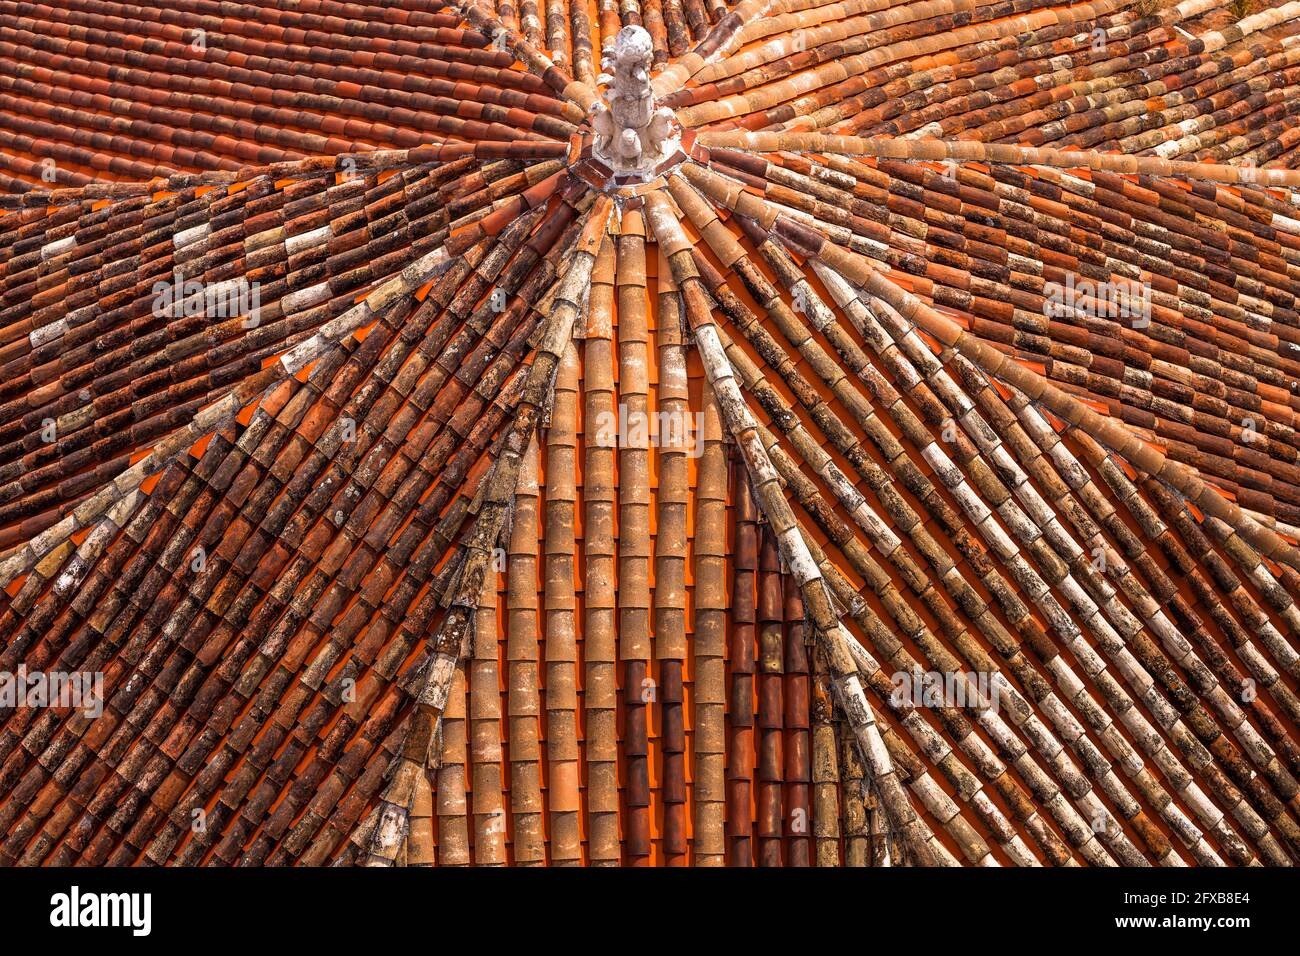 Red tiled rooftops in the old town section of Split, Croatia, as seen from atop the bell tower of the Cathedral of Saint Domnius. Croatia Stock Photo